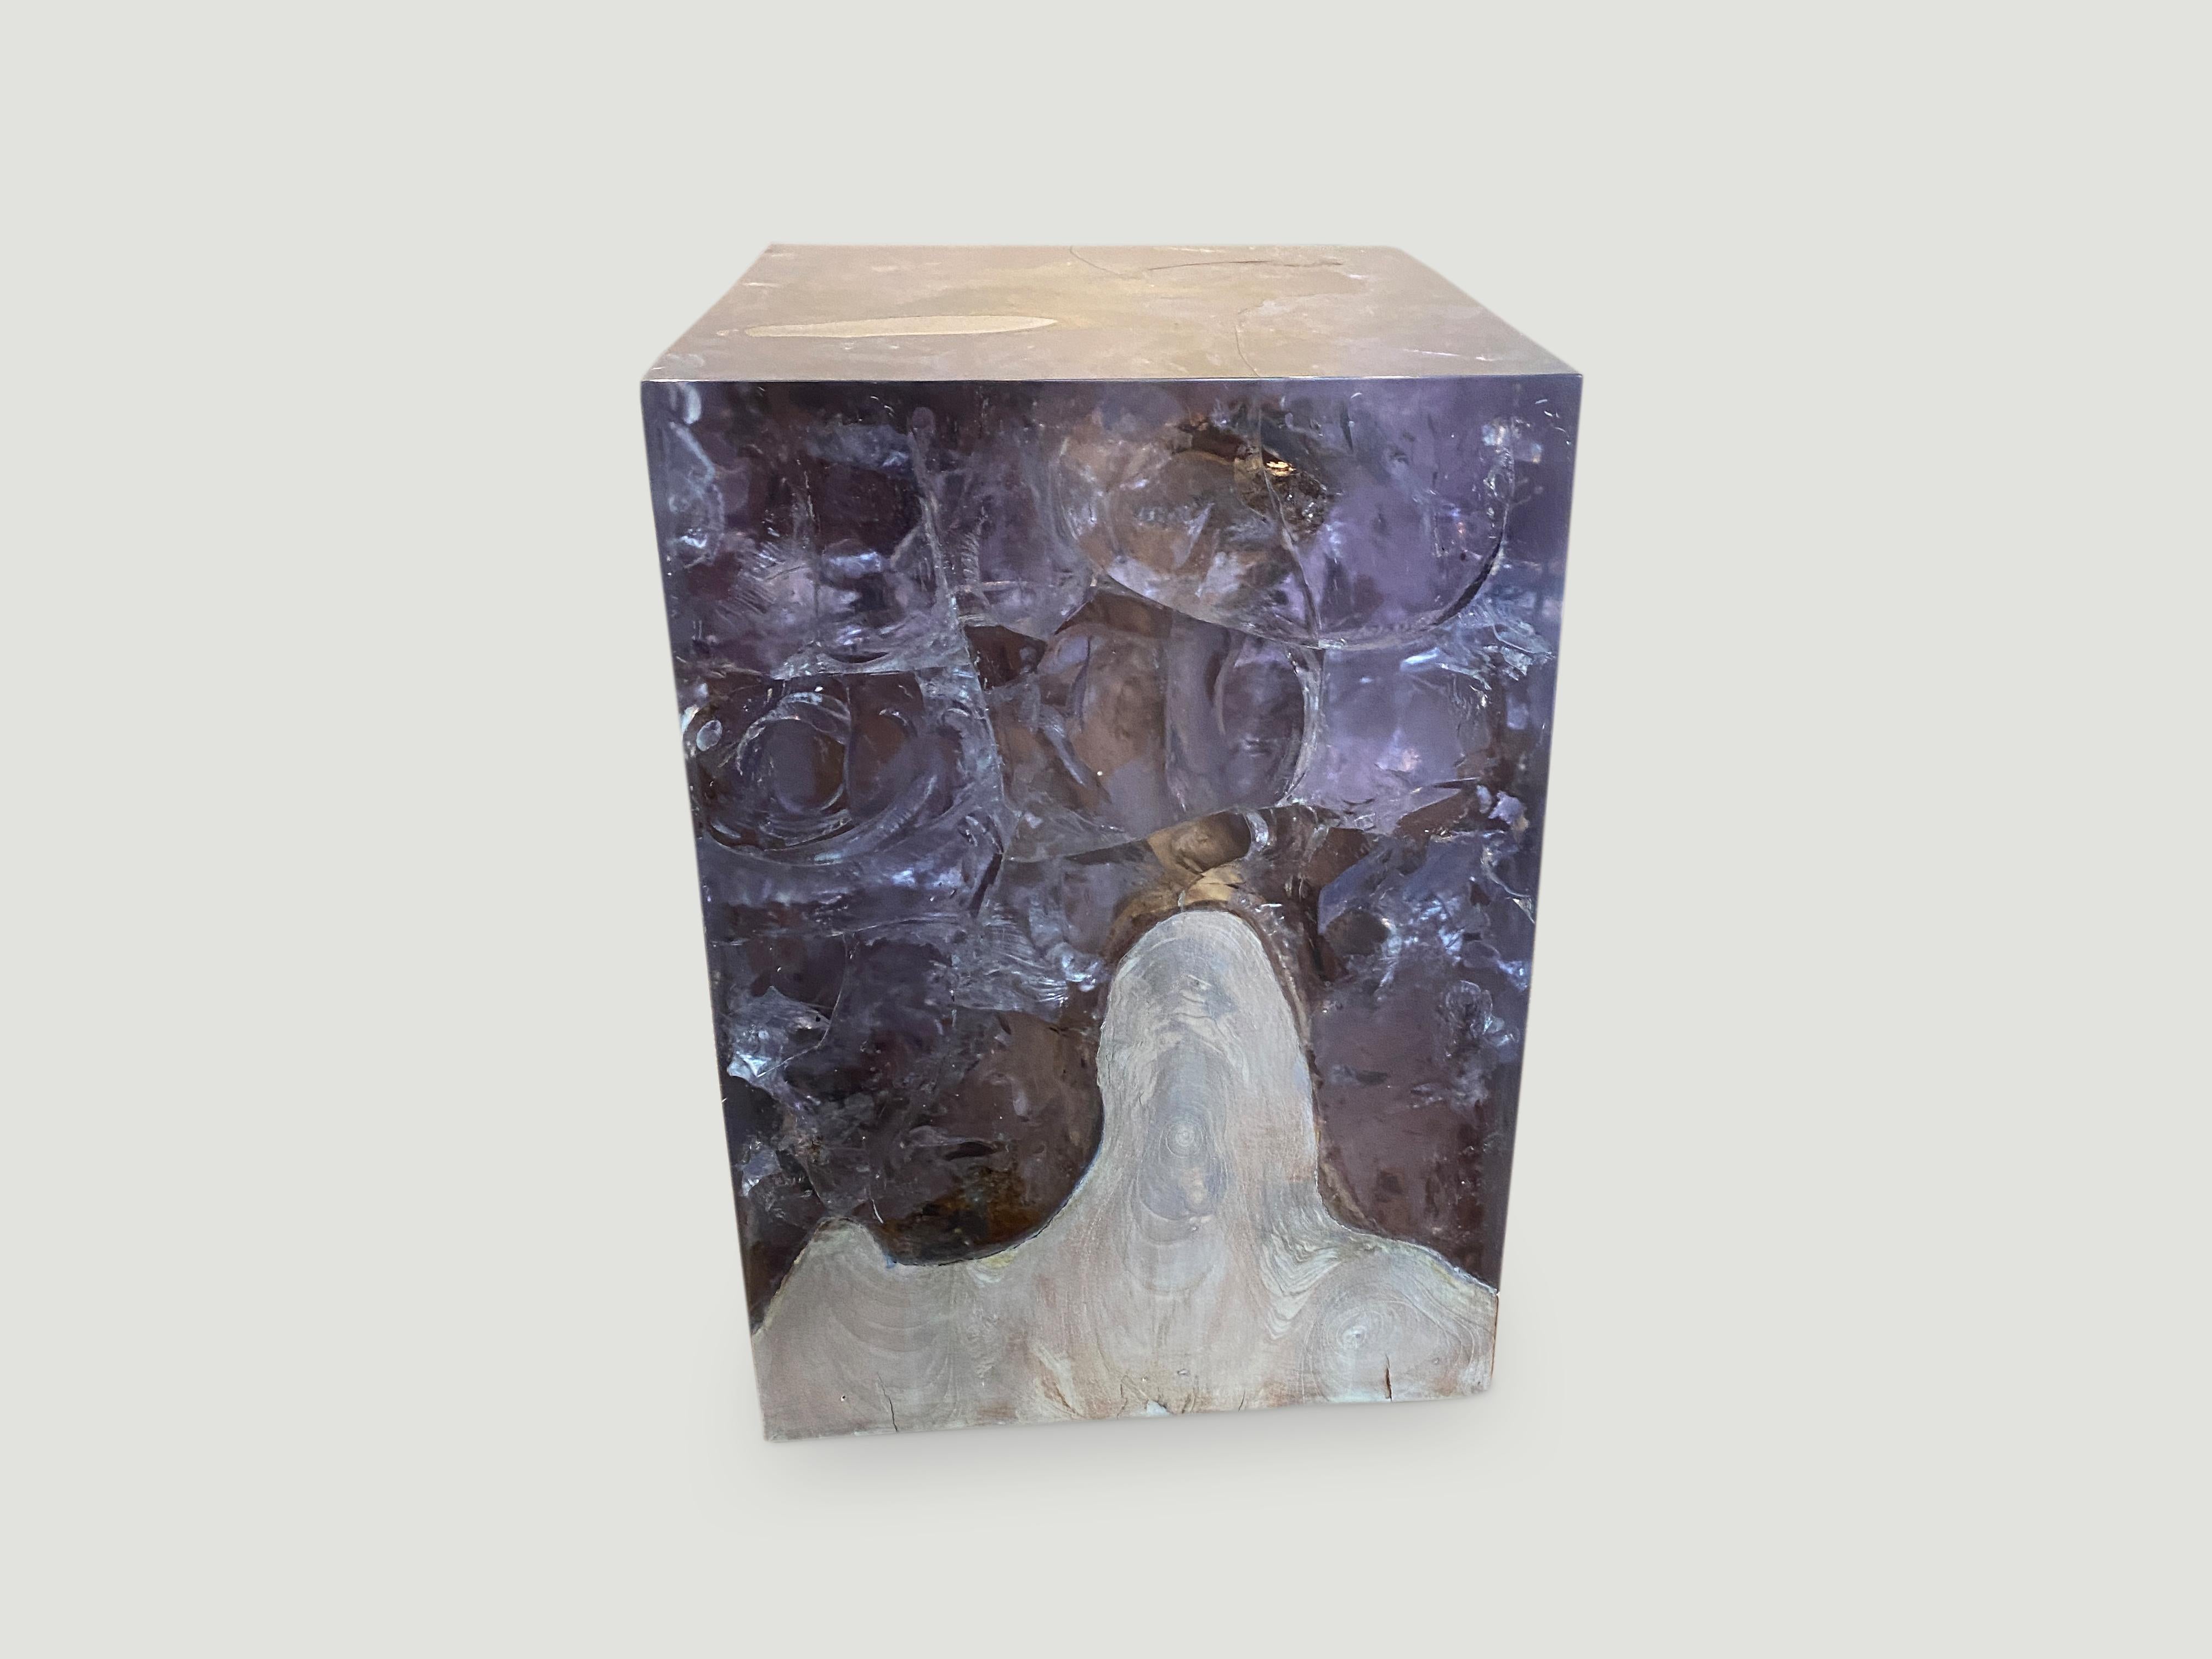 The St. Barts side table is a unique variation of the teak and cracked resin cube. Ice blue or aqua resin is cracked and added into the natural grooves of the bleached teak wood, sanded and finished with a high polish.

The St. Barts collection